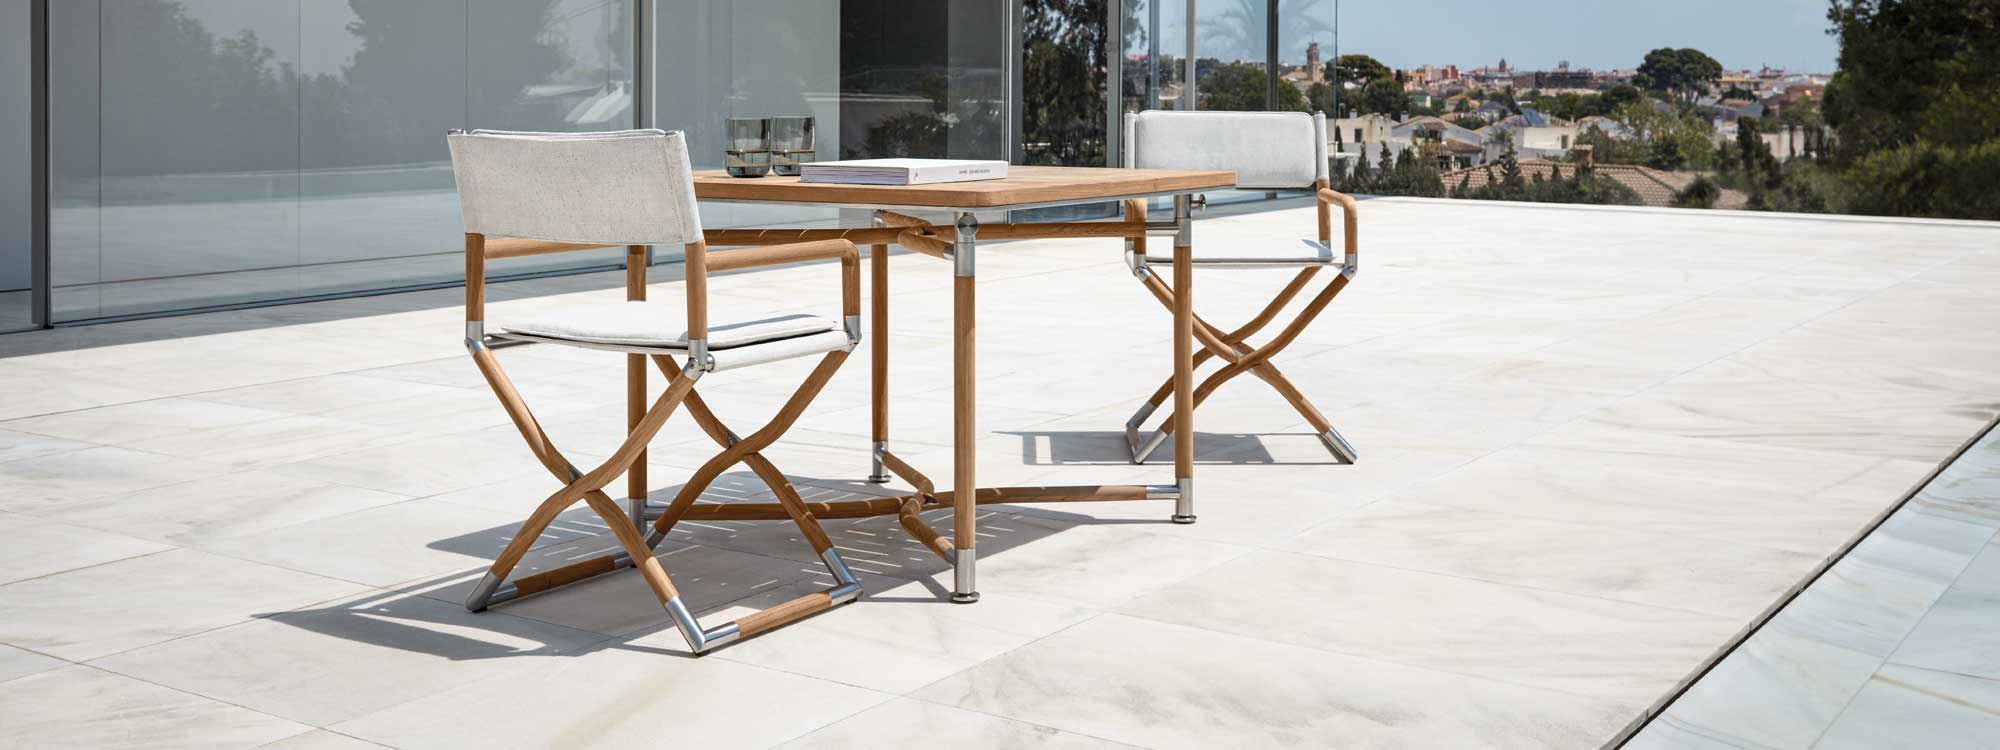 Image of pair of Navigator teak director chairs and folding dining table by Gloster on sunny terrace